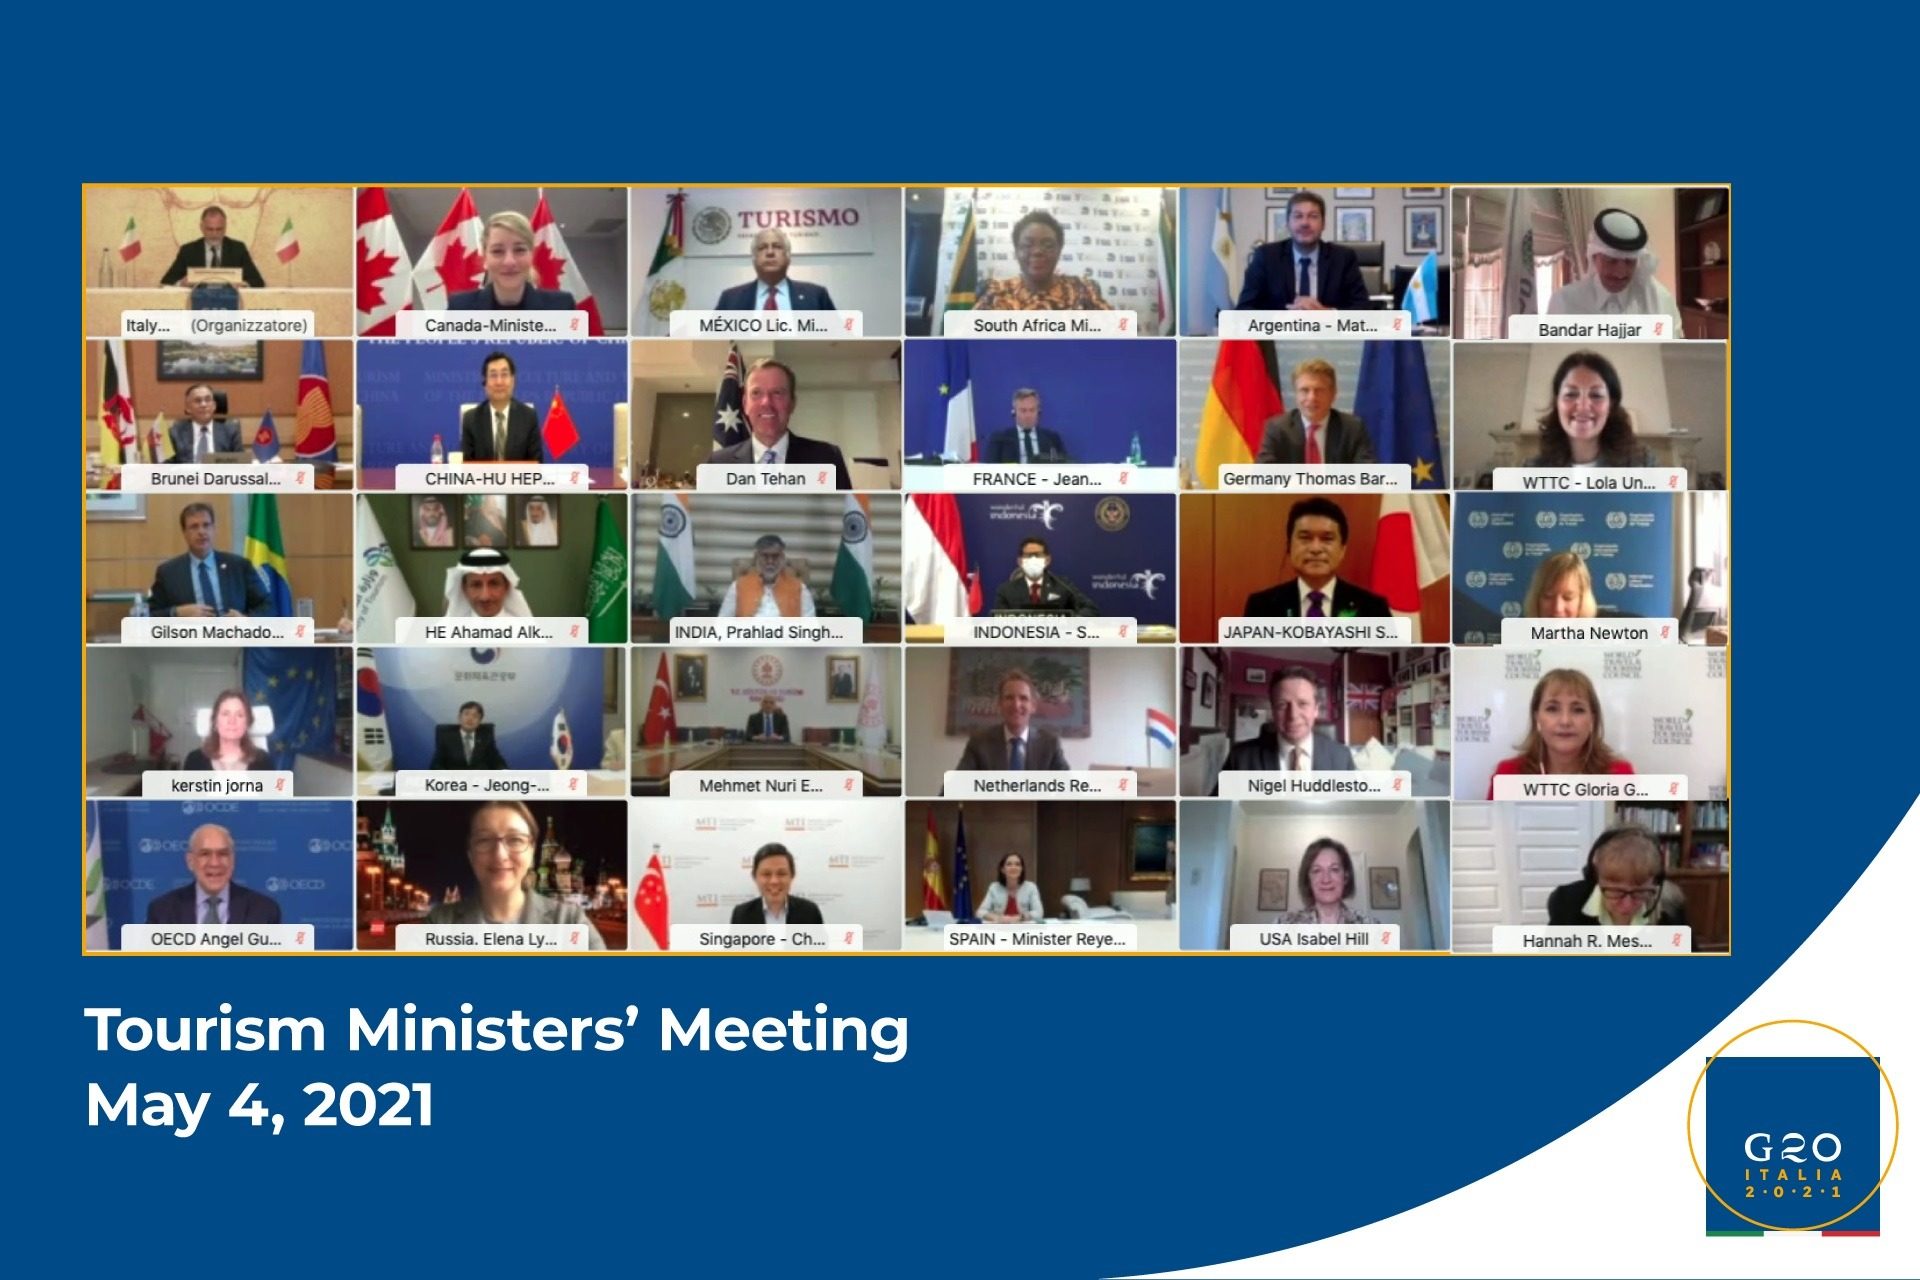 G20 Ministerial Meeting on Tourism: agreement on guidelines for the future of the sector